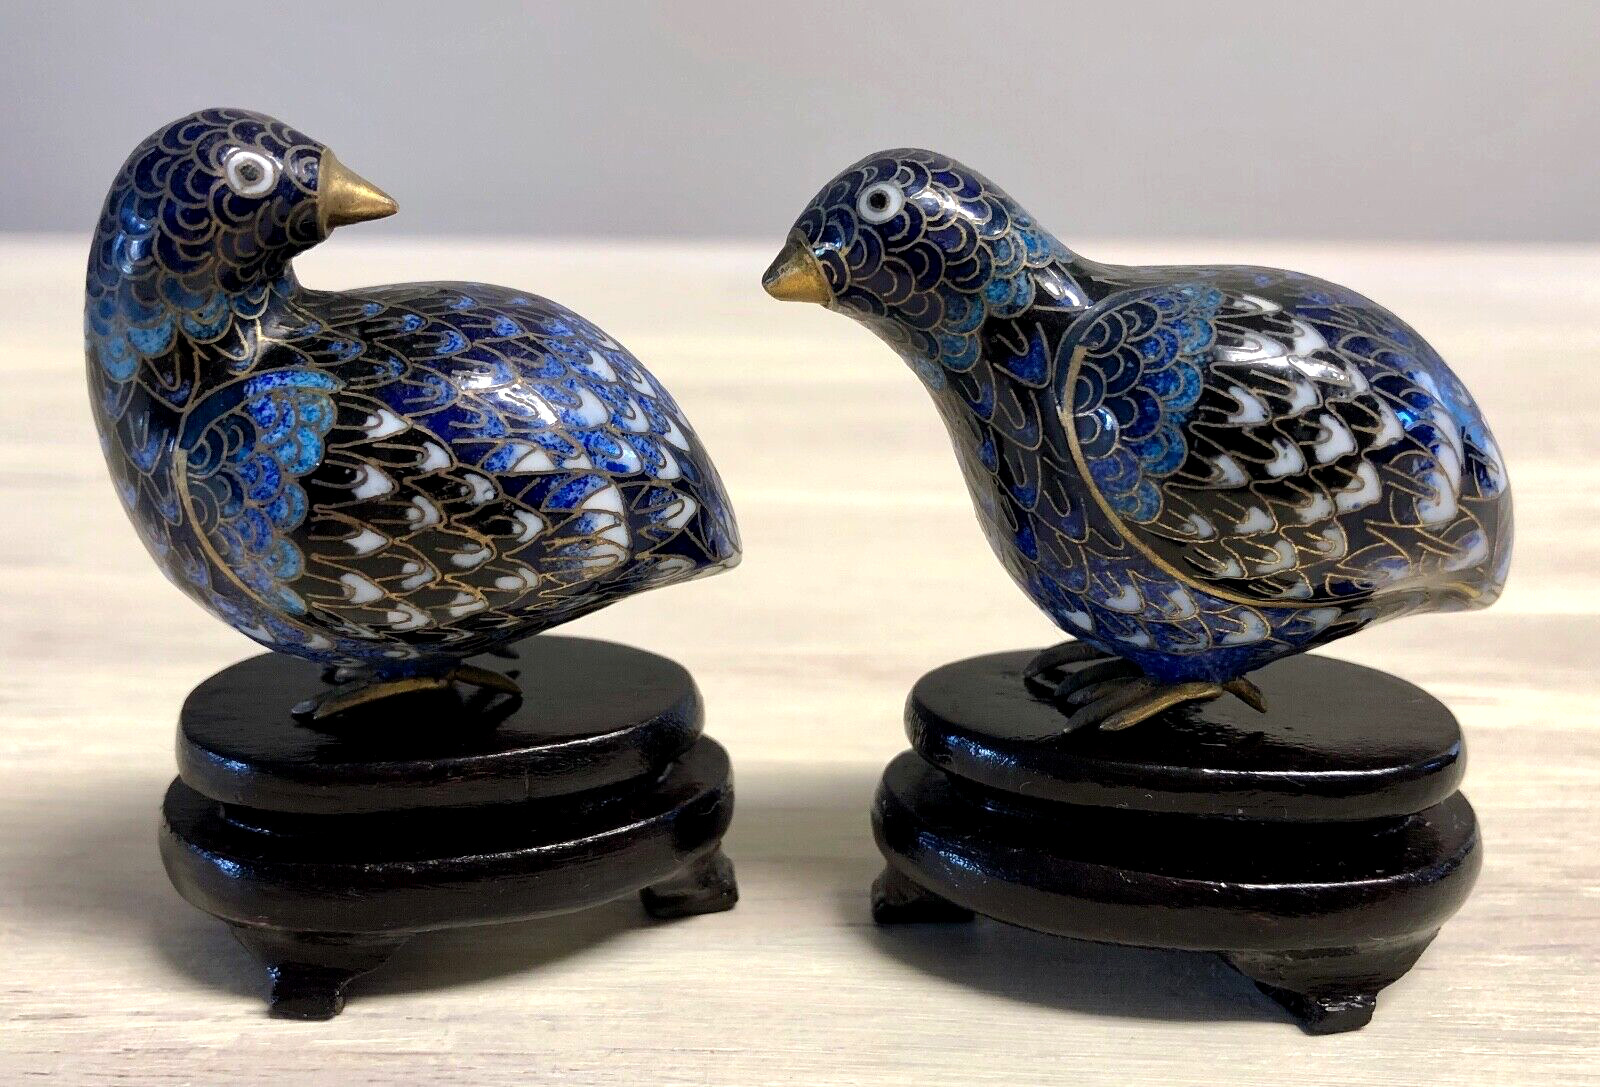 Vintage Chinese Cloisonné Quail Partridge Figurines with Stands